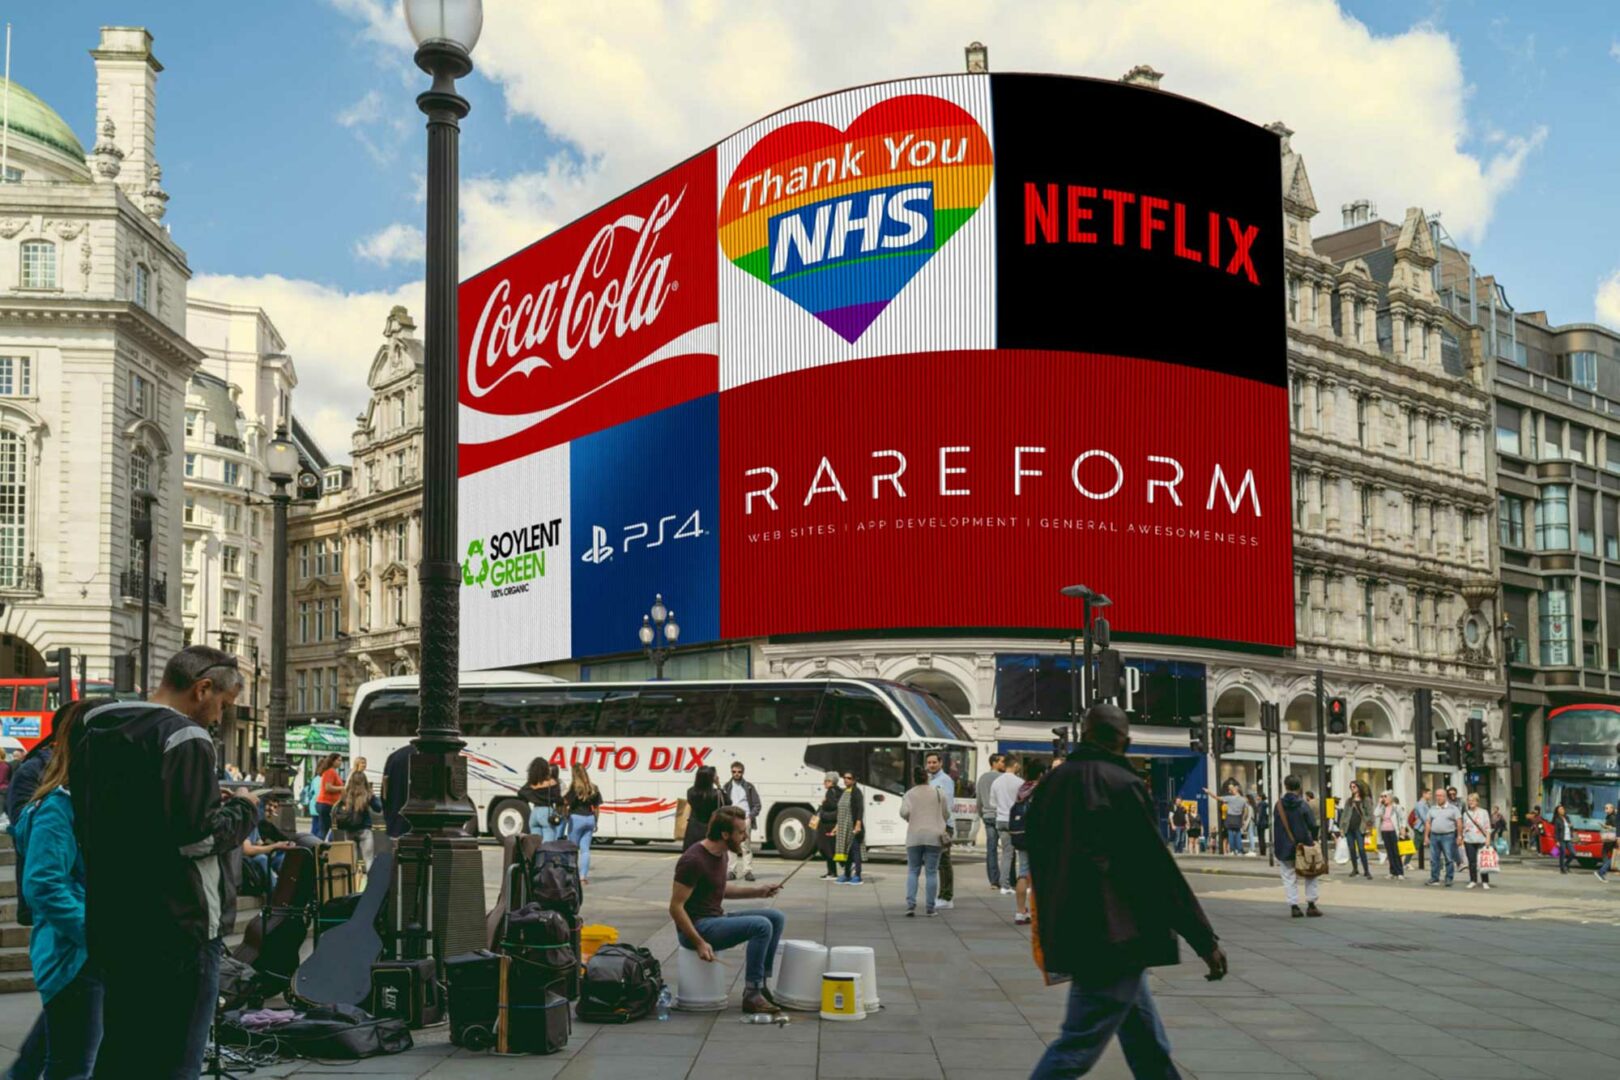 A view of the digital billboards at Piccadilly Circus, with Rare Form advertised alongside Coca-Cola, Netflix, Thank you NHS, PS4, and Soylent Green